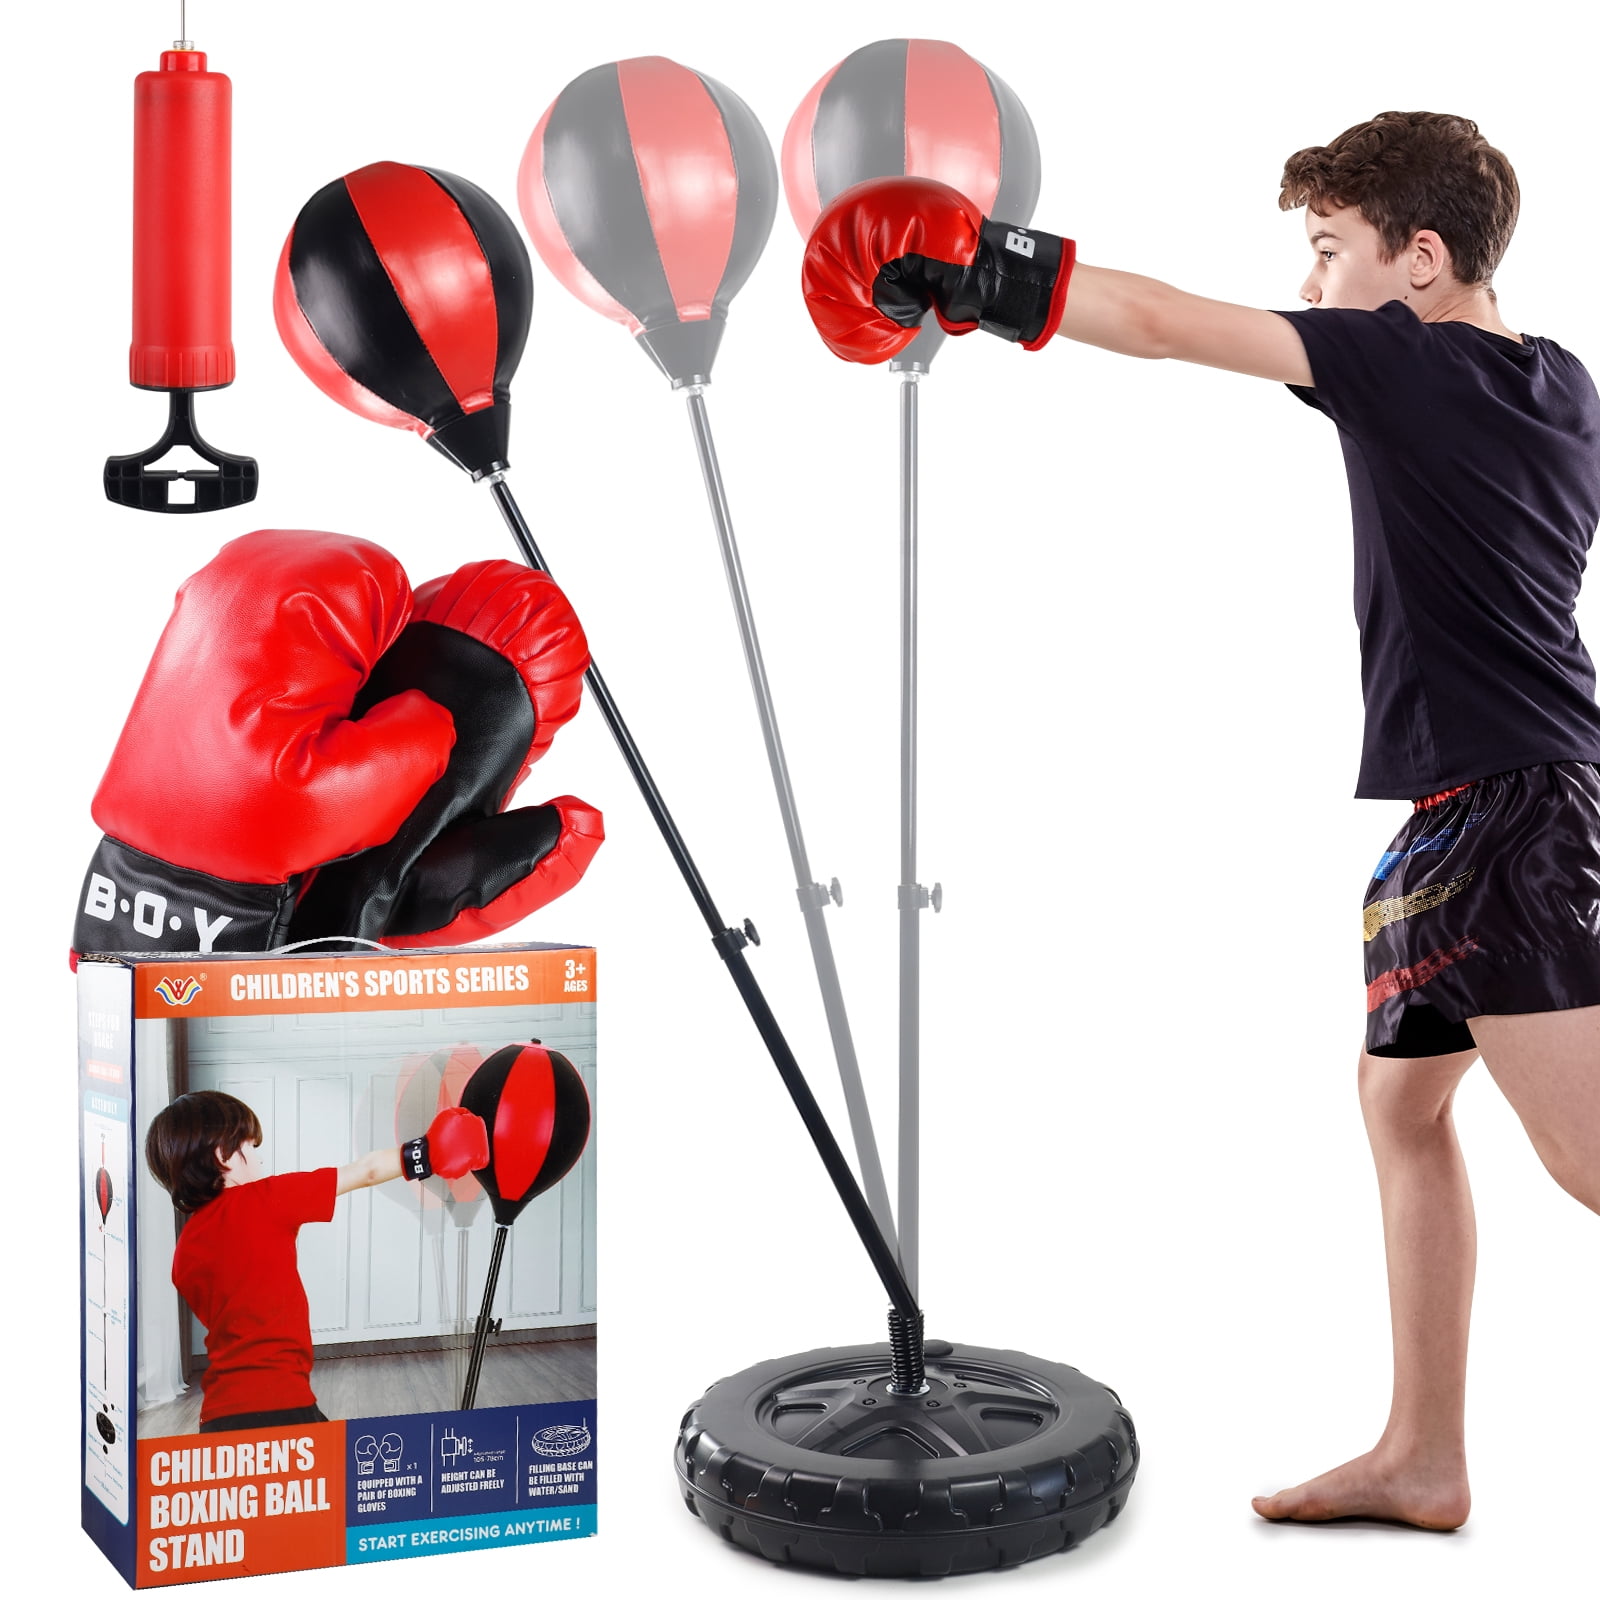 49 inch Punching Bag Boxing Set for Kids Sport Game Toys for Boys 3-6-10 Years with Junior Gloves Adjustable Stand, Kids Unisex, Size: One size, Black